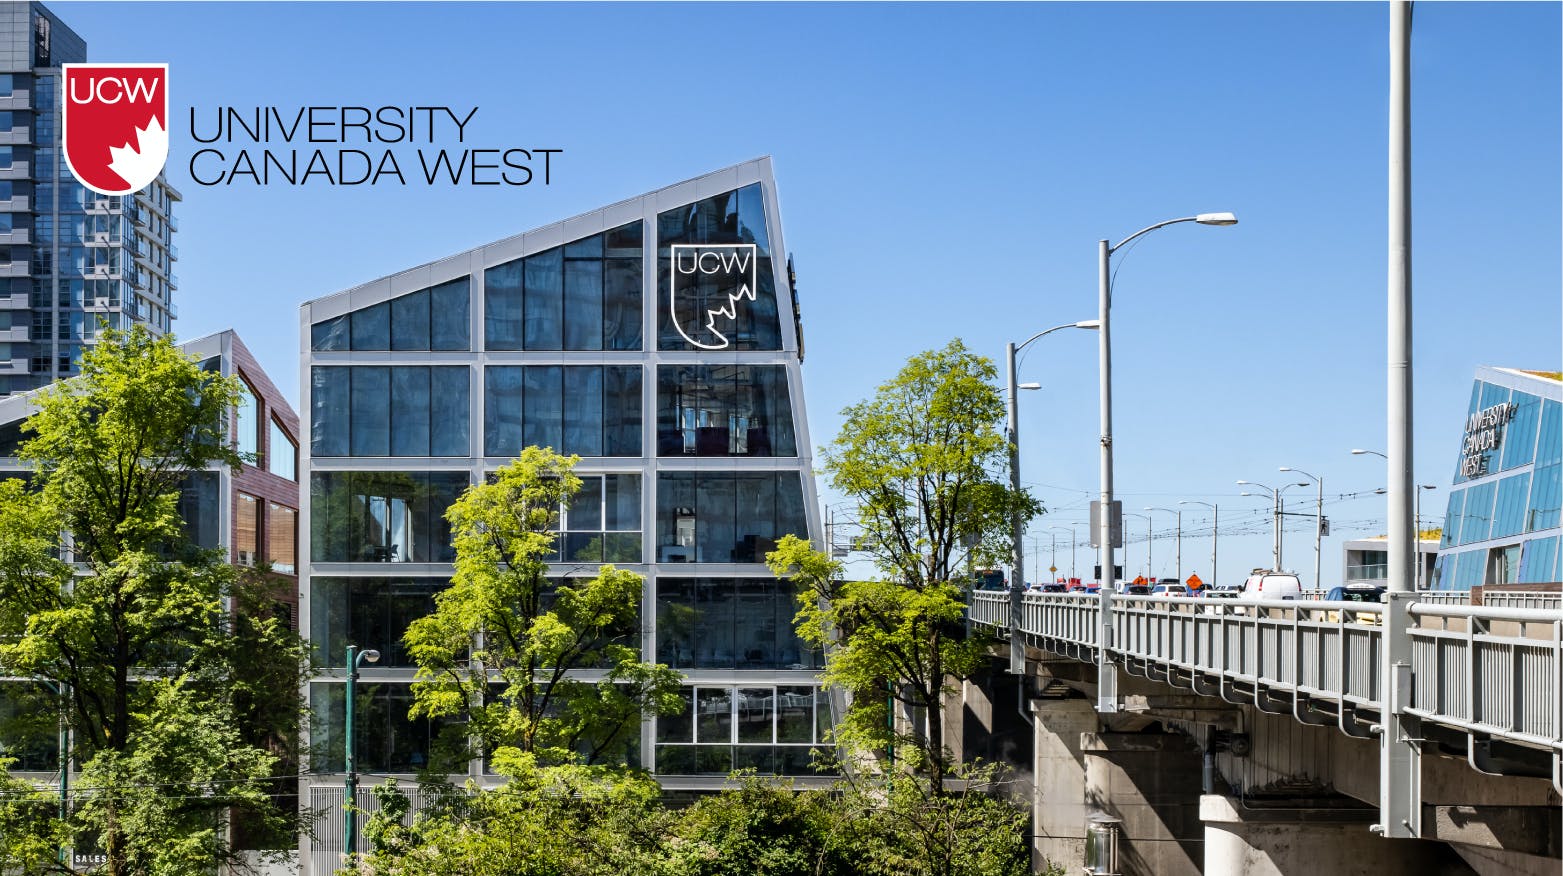 ABOUT UNIVERSITY CANADA WEST